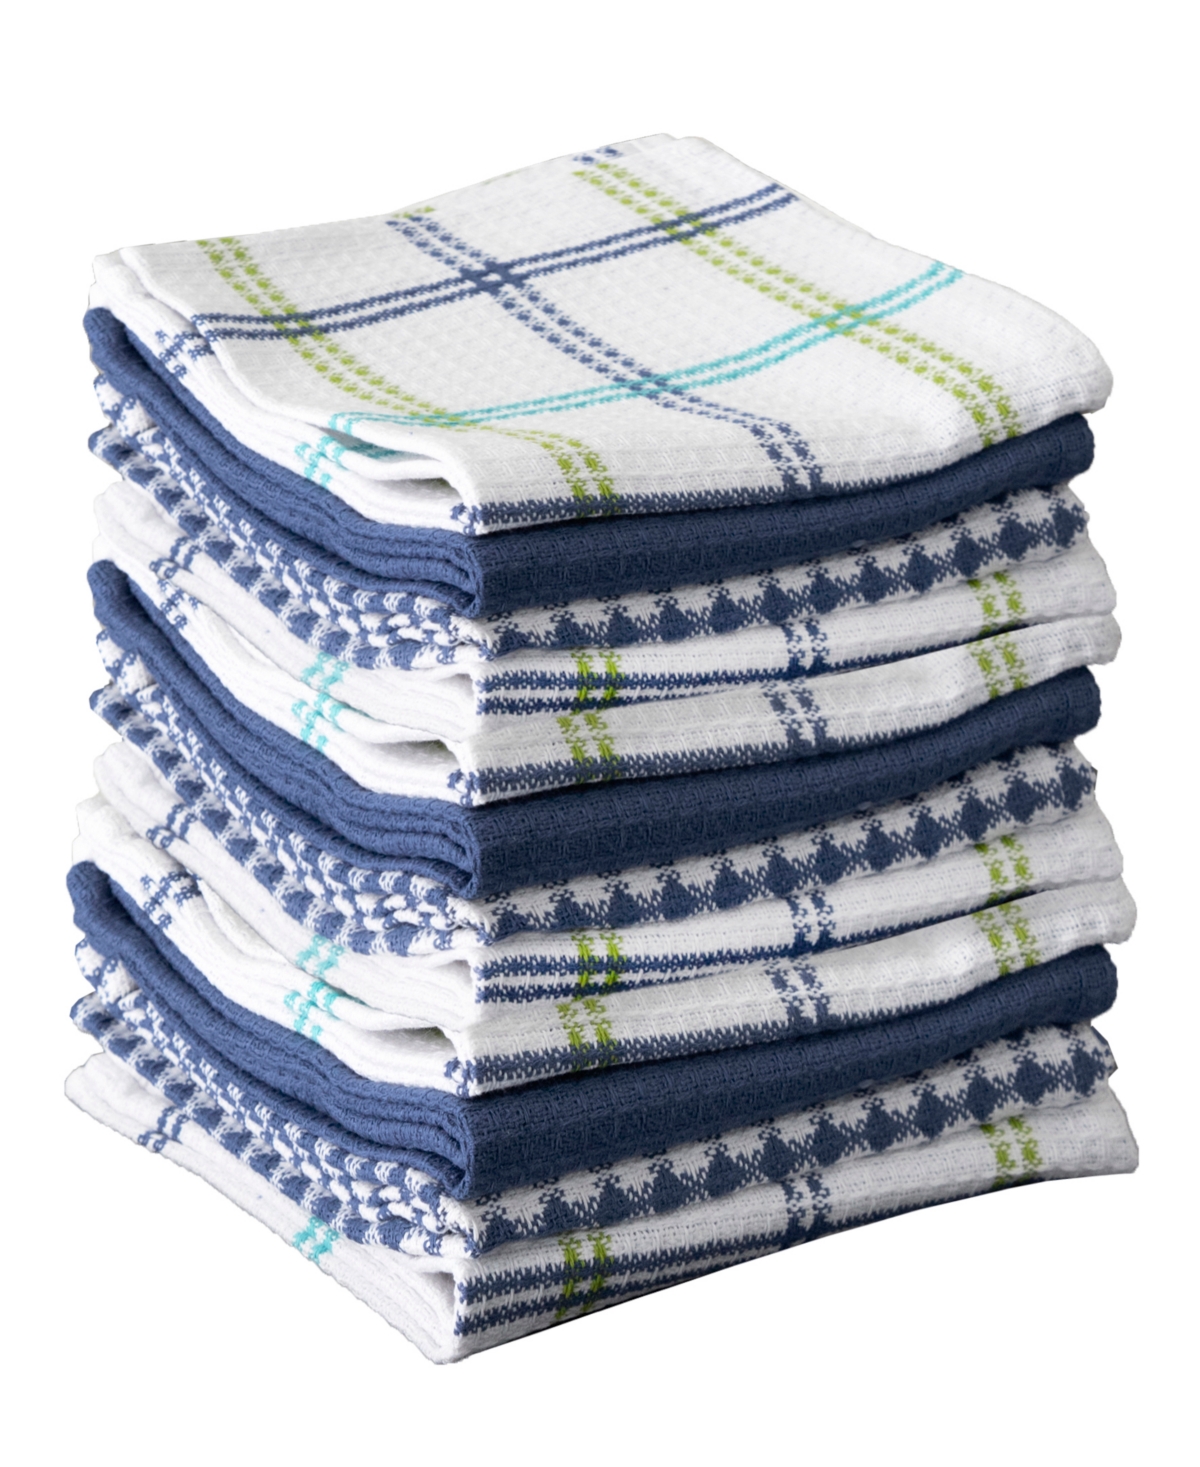 Coordinating Flat Waffle Weave Dish Cloth, Set of 12 - Neutral